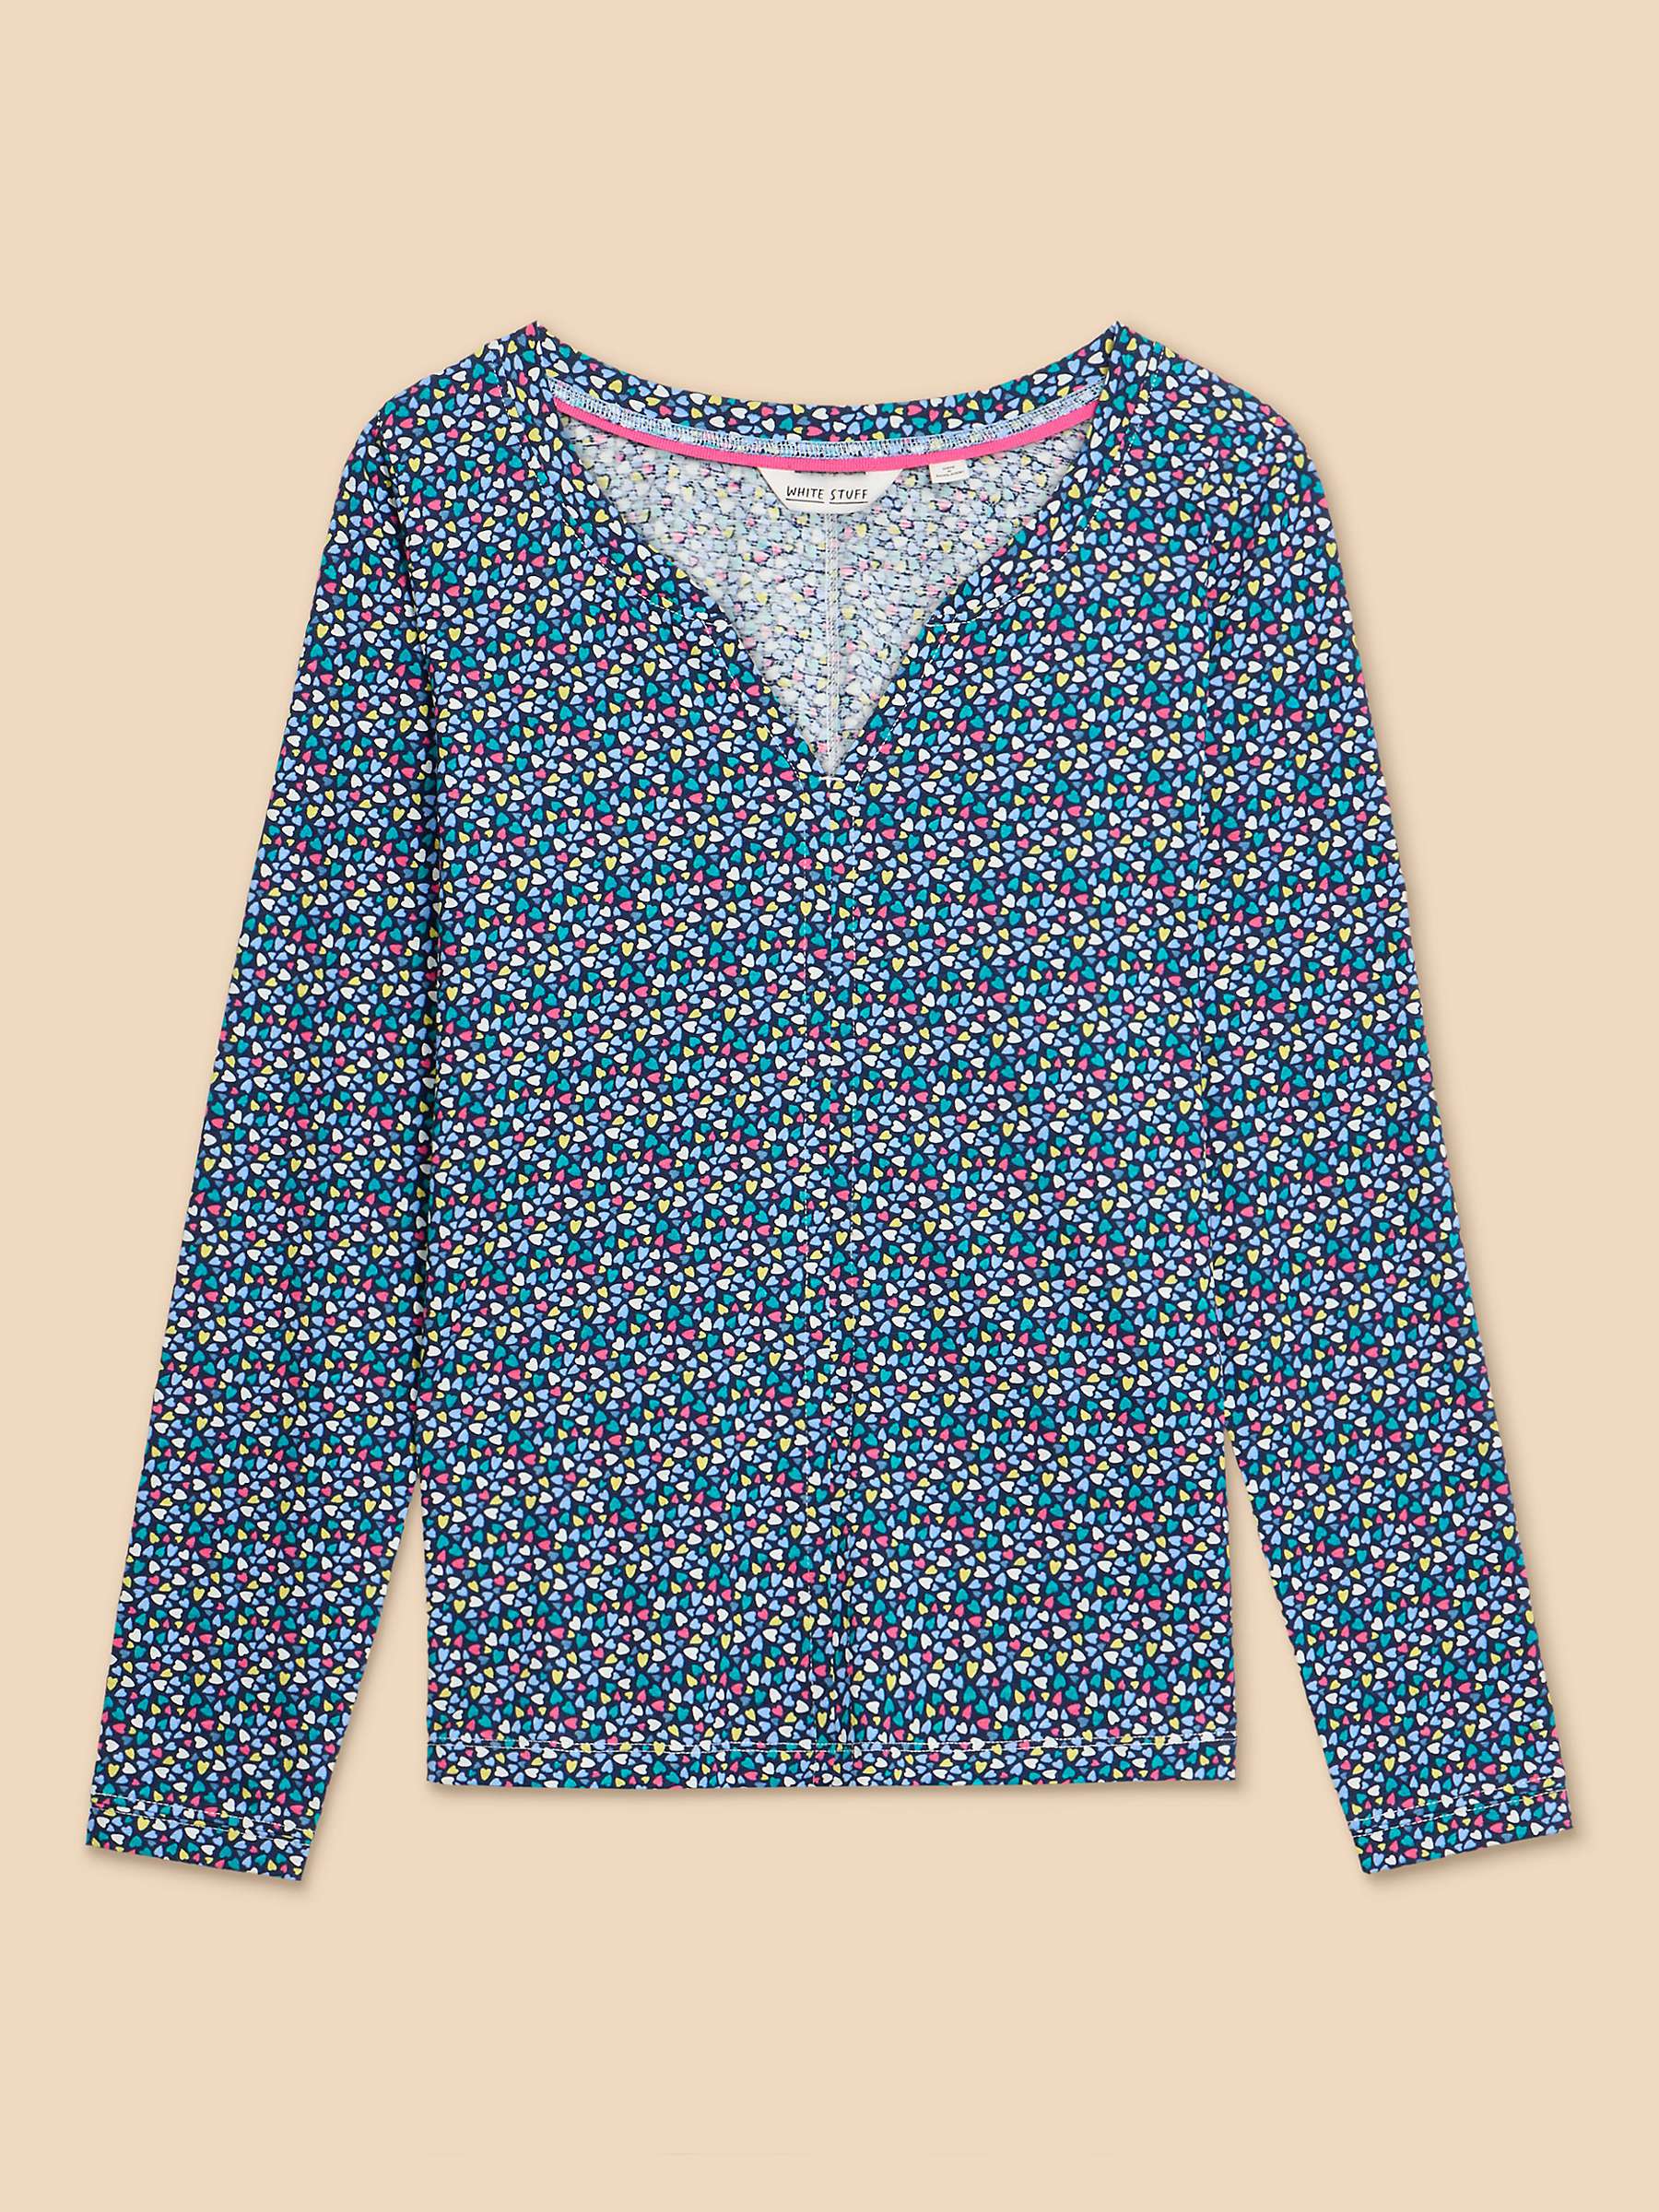 Buy White Stuff Nelly Cotton Long Sleeve Top, Blue Pr Online at johnlewis.com